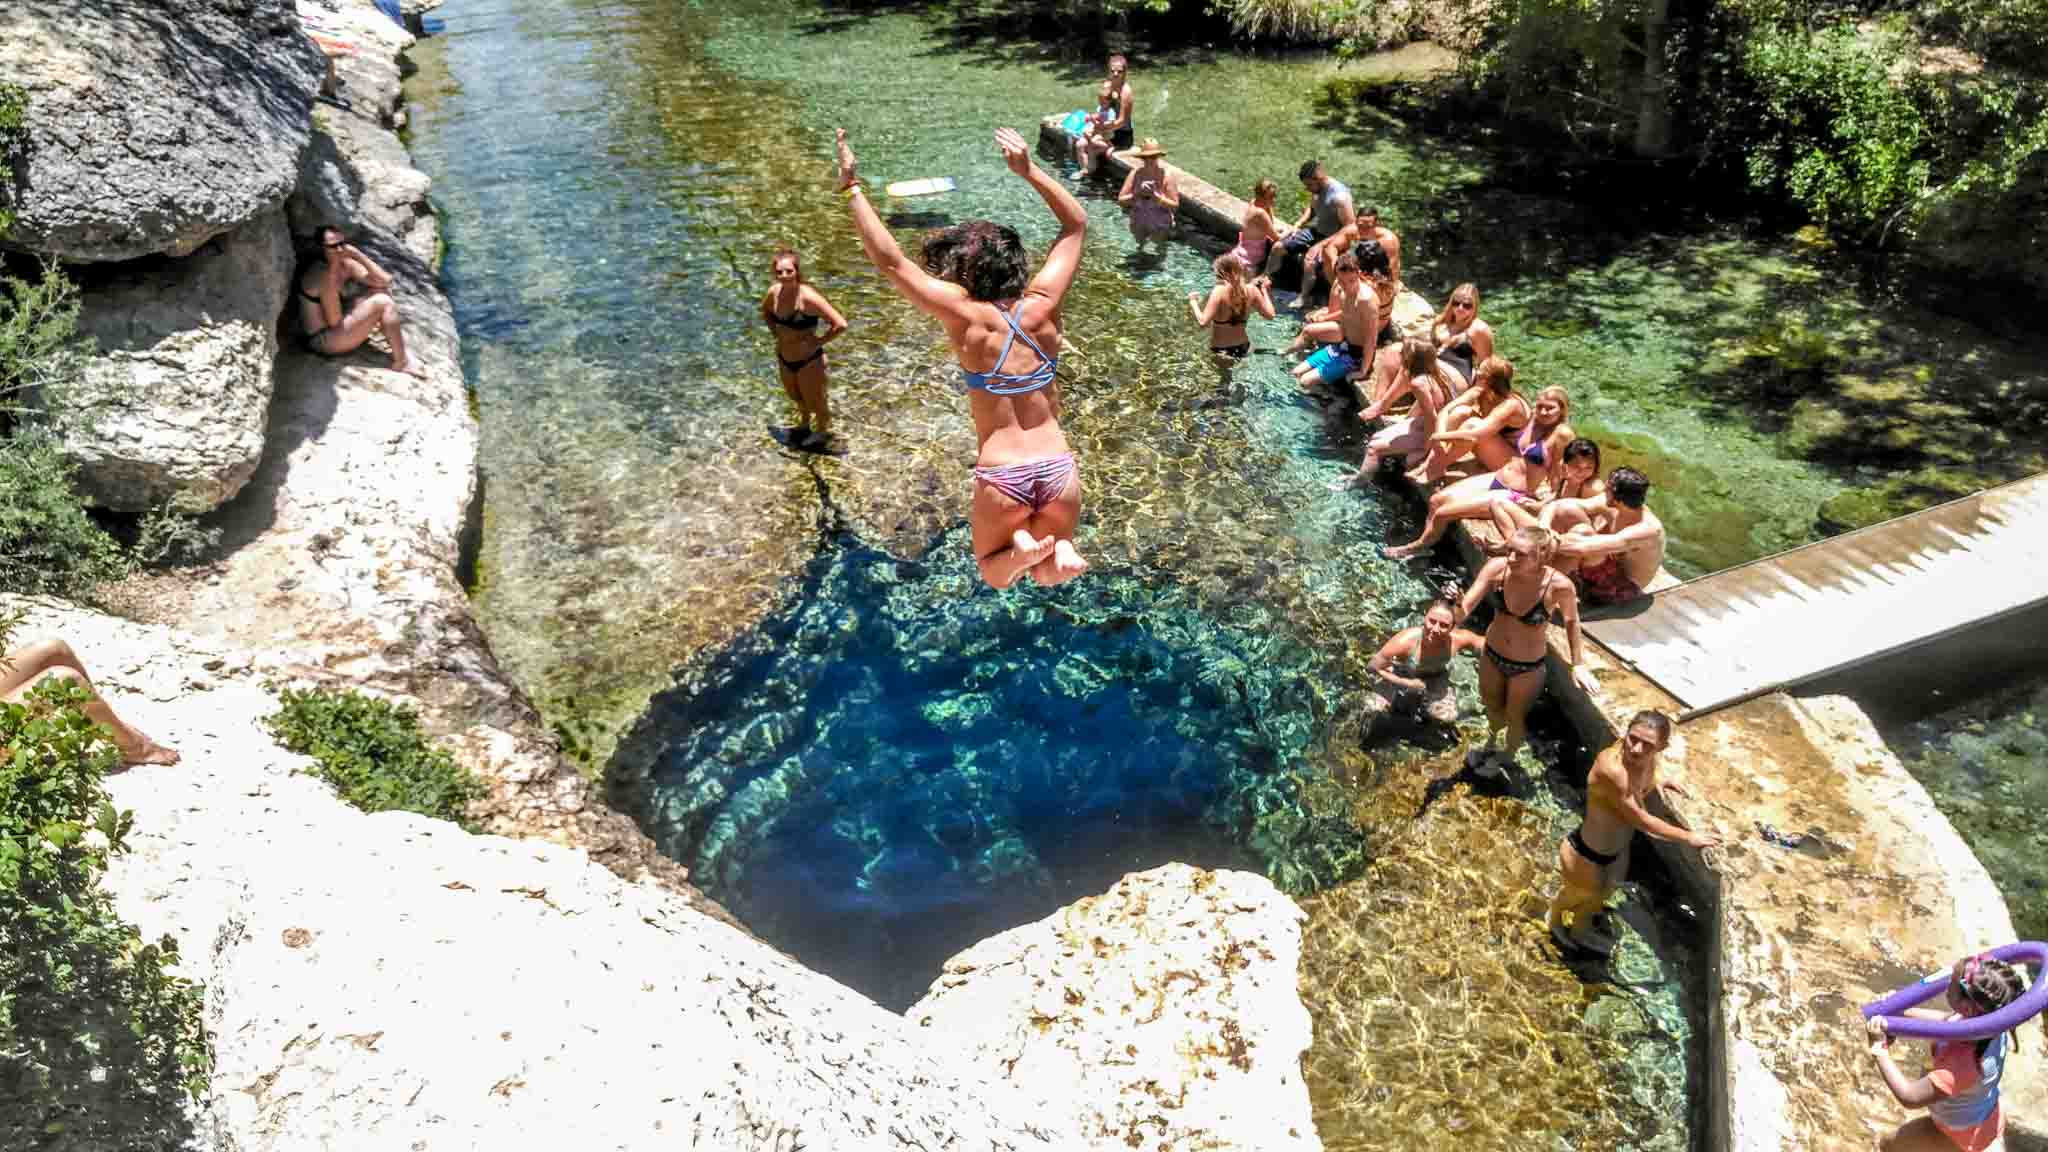 Woman jumping into the Jacob's Well swimming hole while people look on.